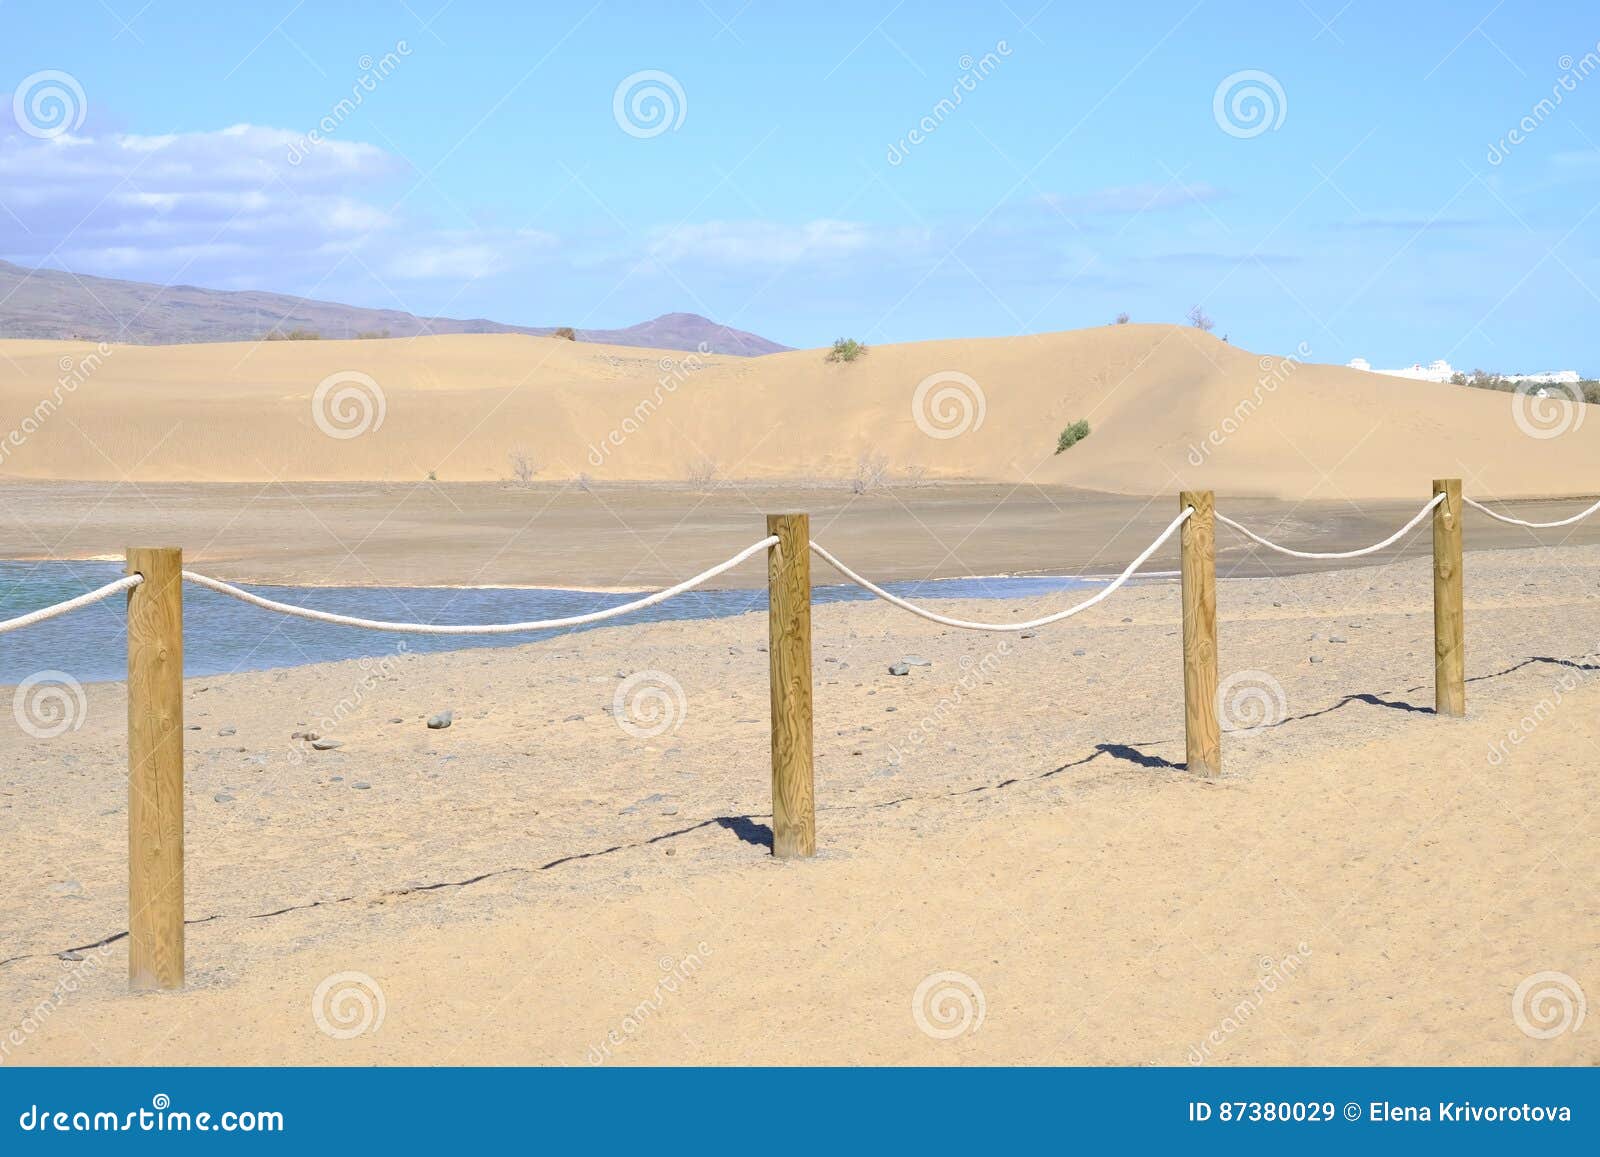 view on the dunes of maspalomas, lagoon and the nature reserve charca de maspalomas on the canary island gran canaria, spain.